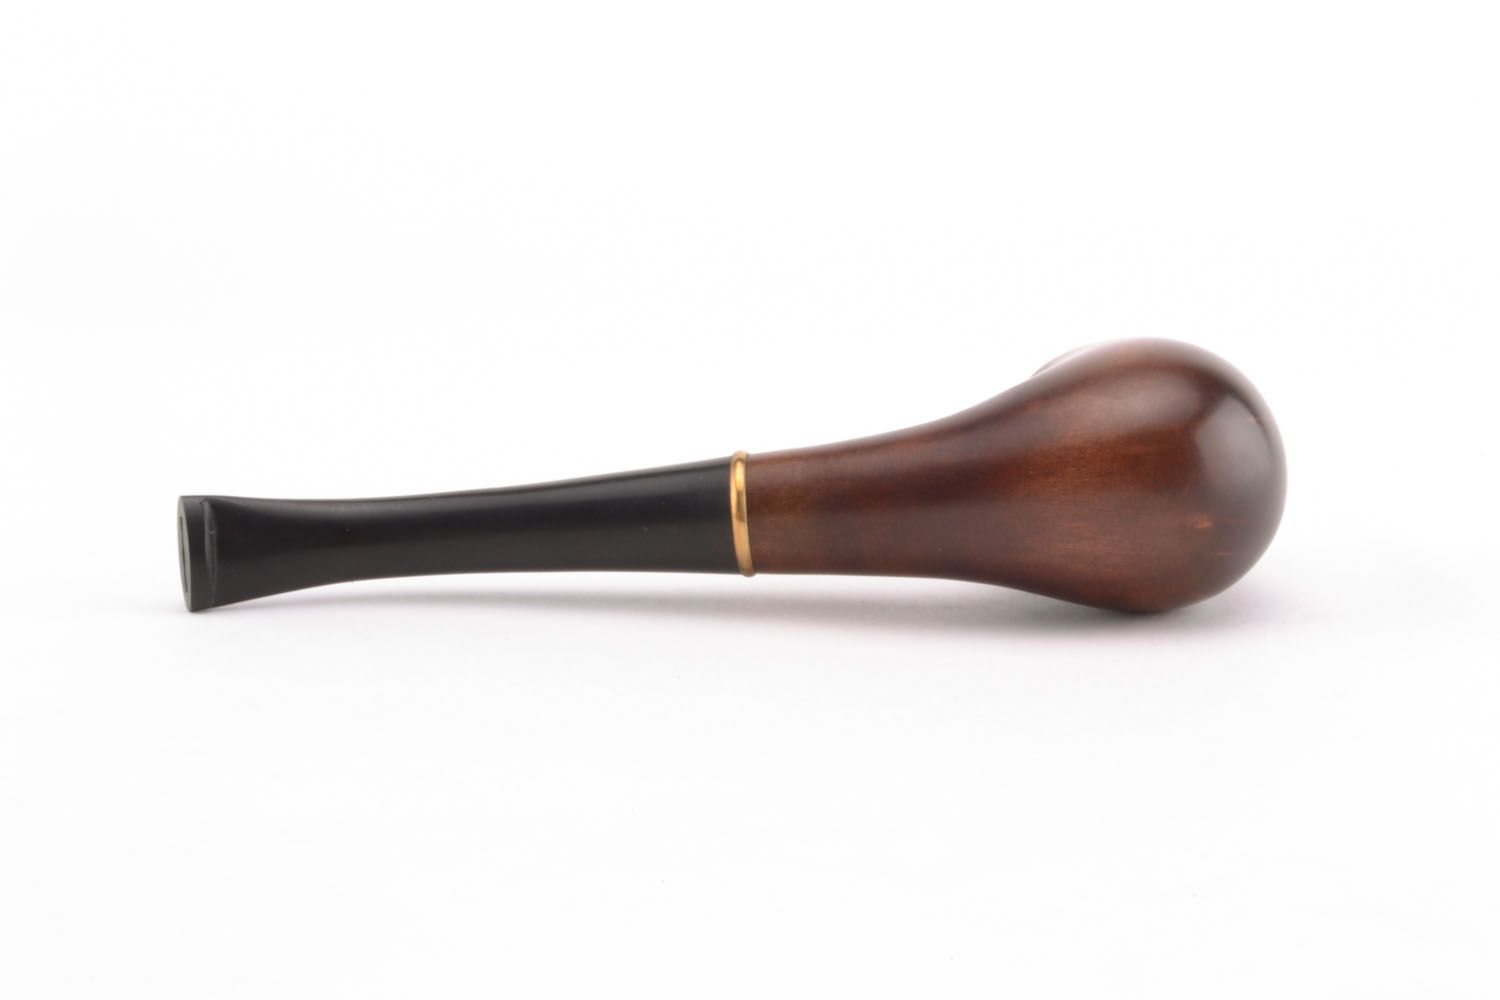 Smoking pipe made of wood for decorative use only photo 4